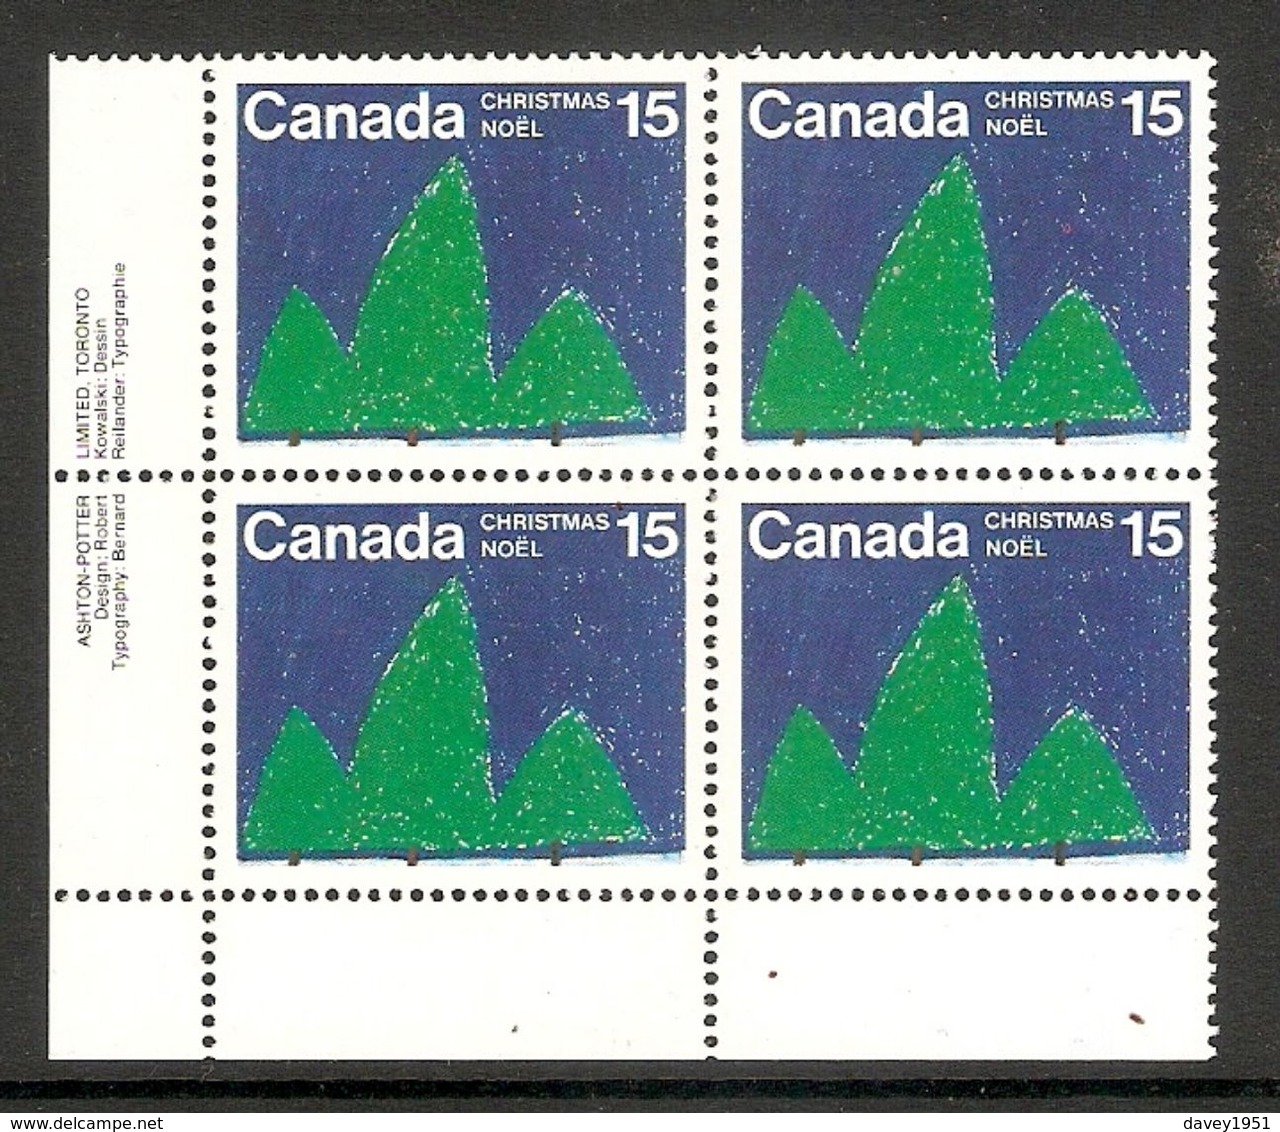 006361 Canada 1975 Christmas 15c Plate Block LL MNH - Plate Number & Inscriptions